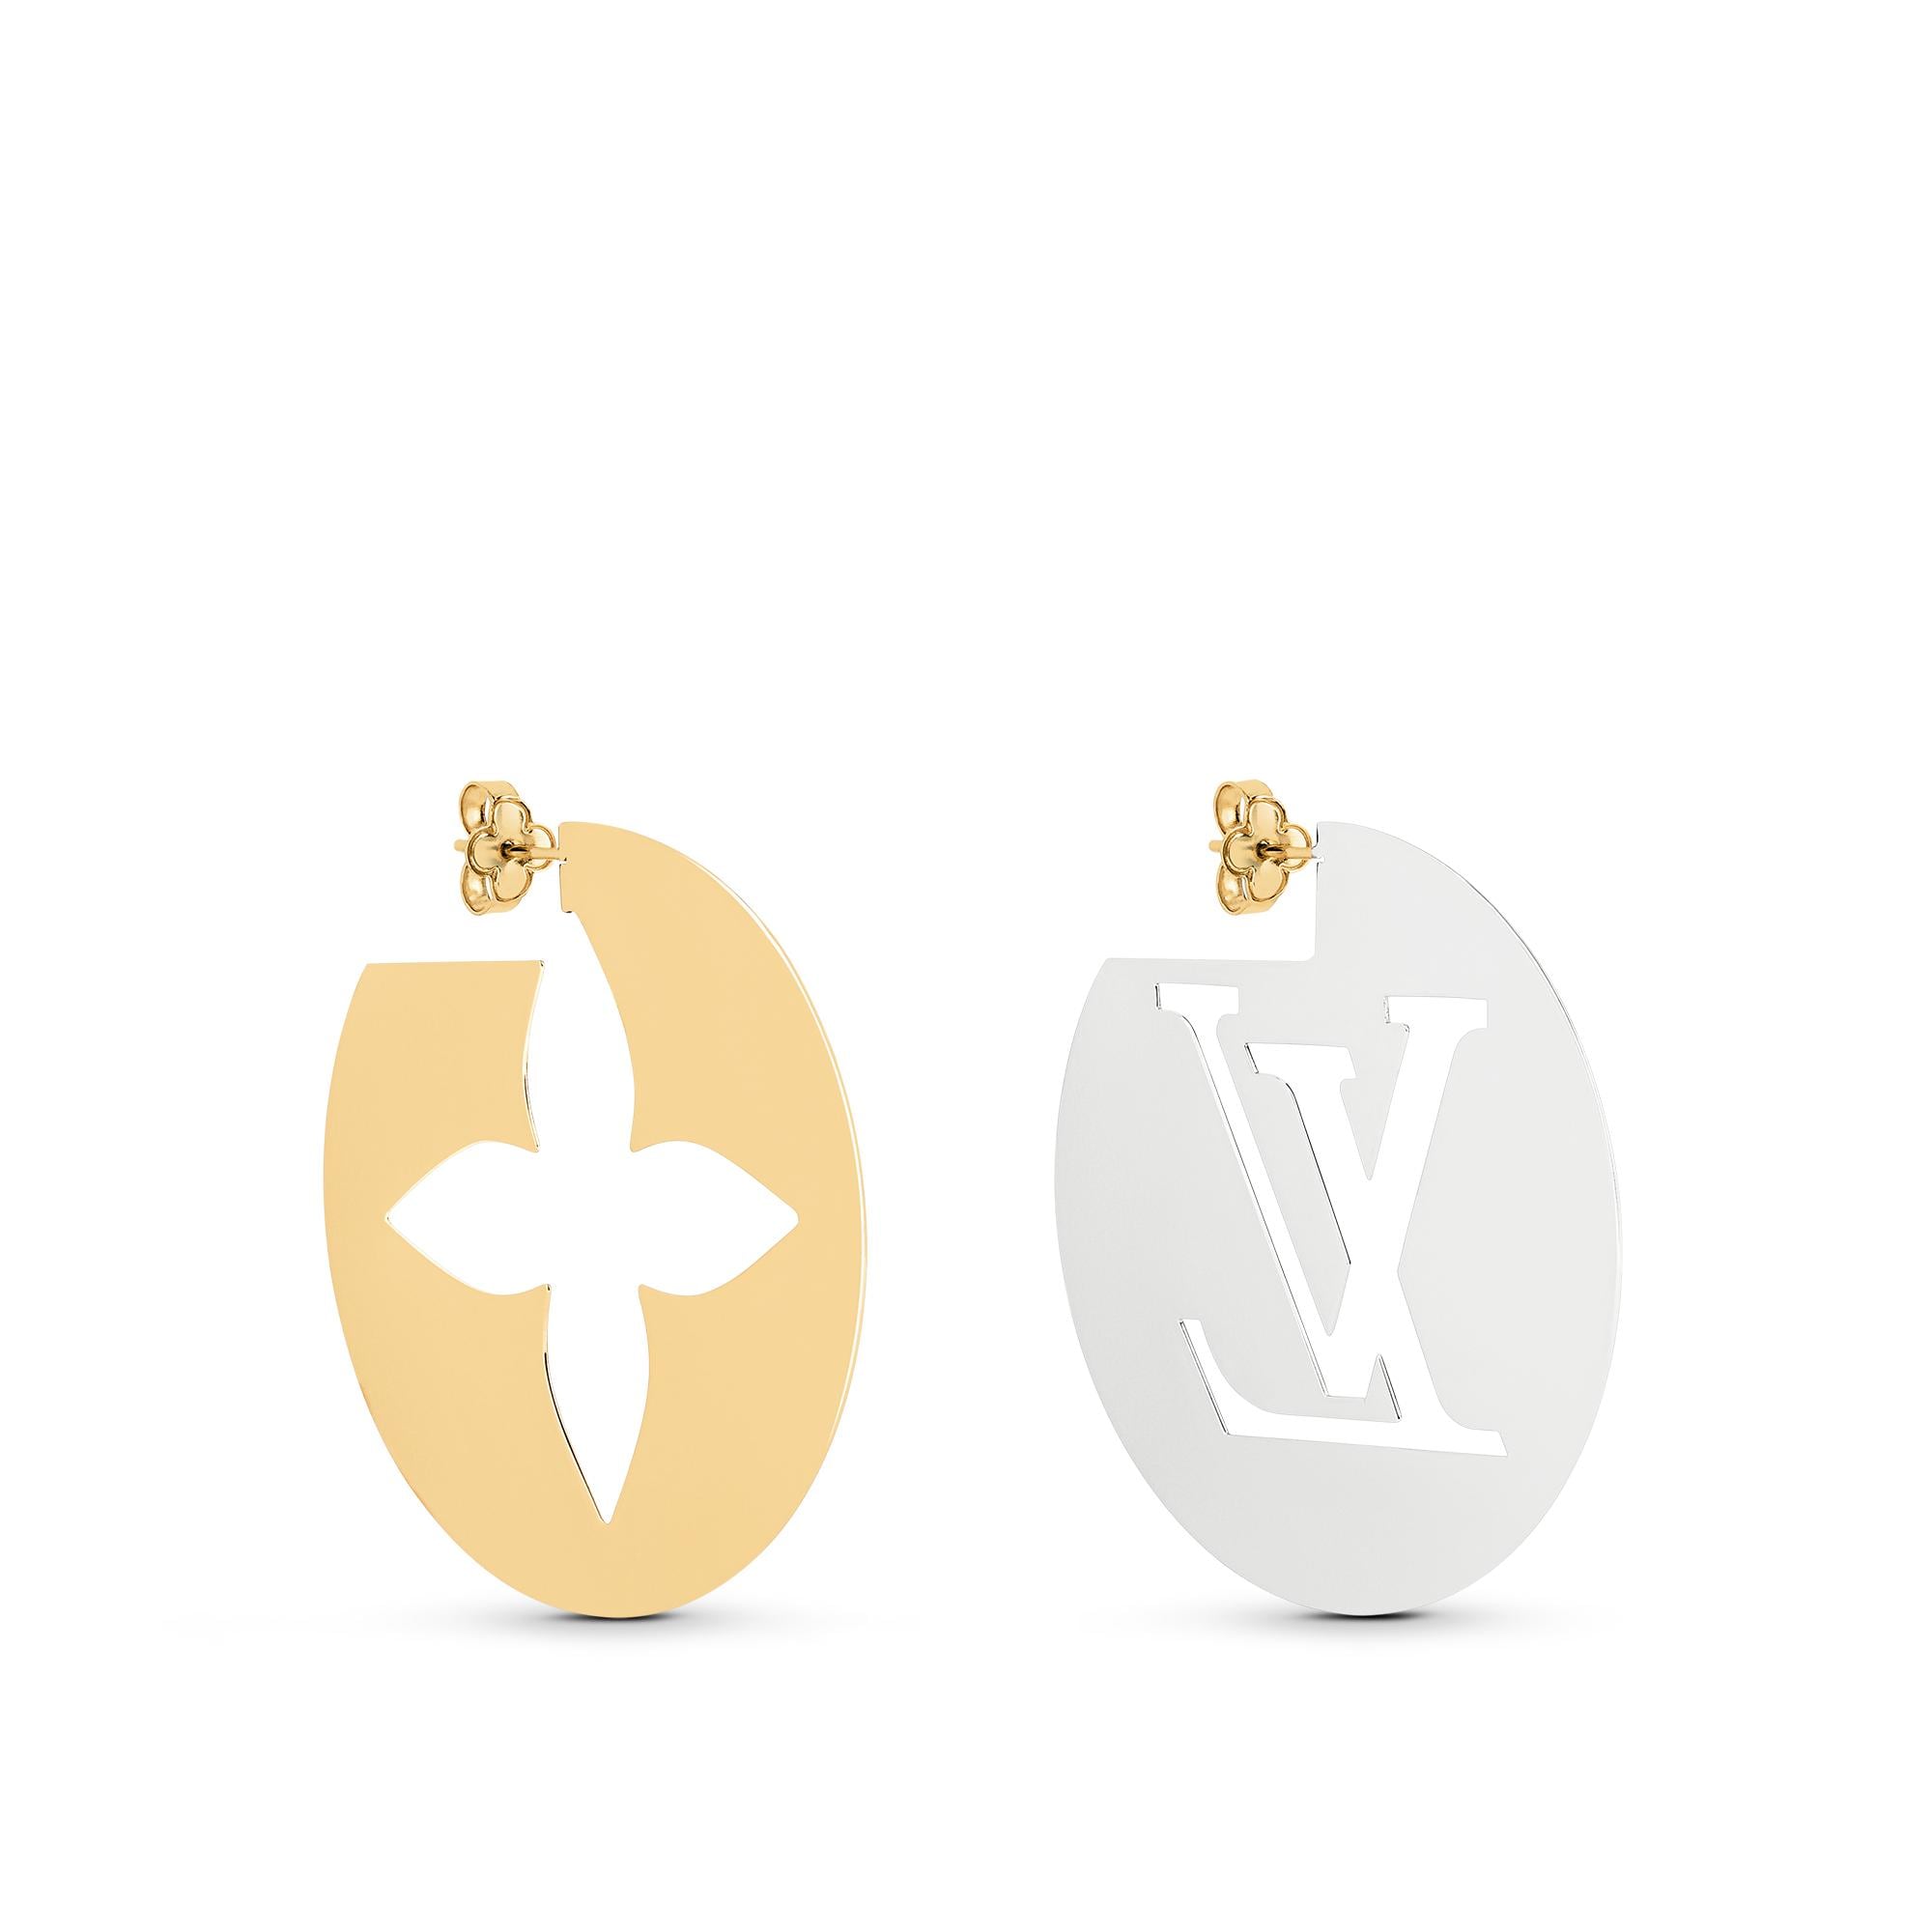 Louis Vuitton Perfect Match Earrings in Gold - Accessories M00394